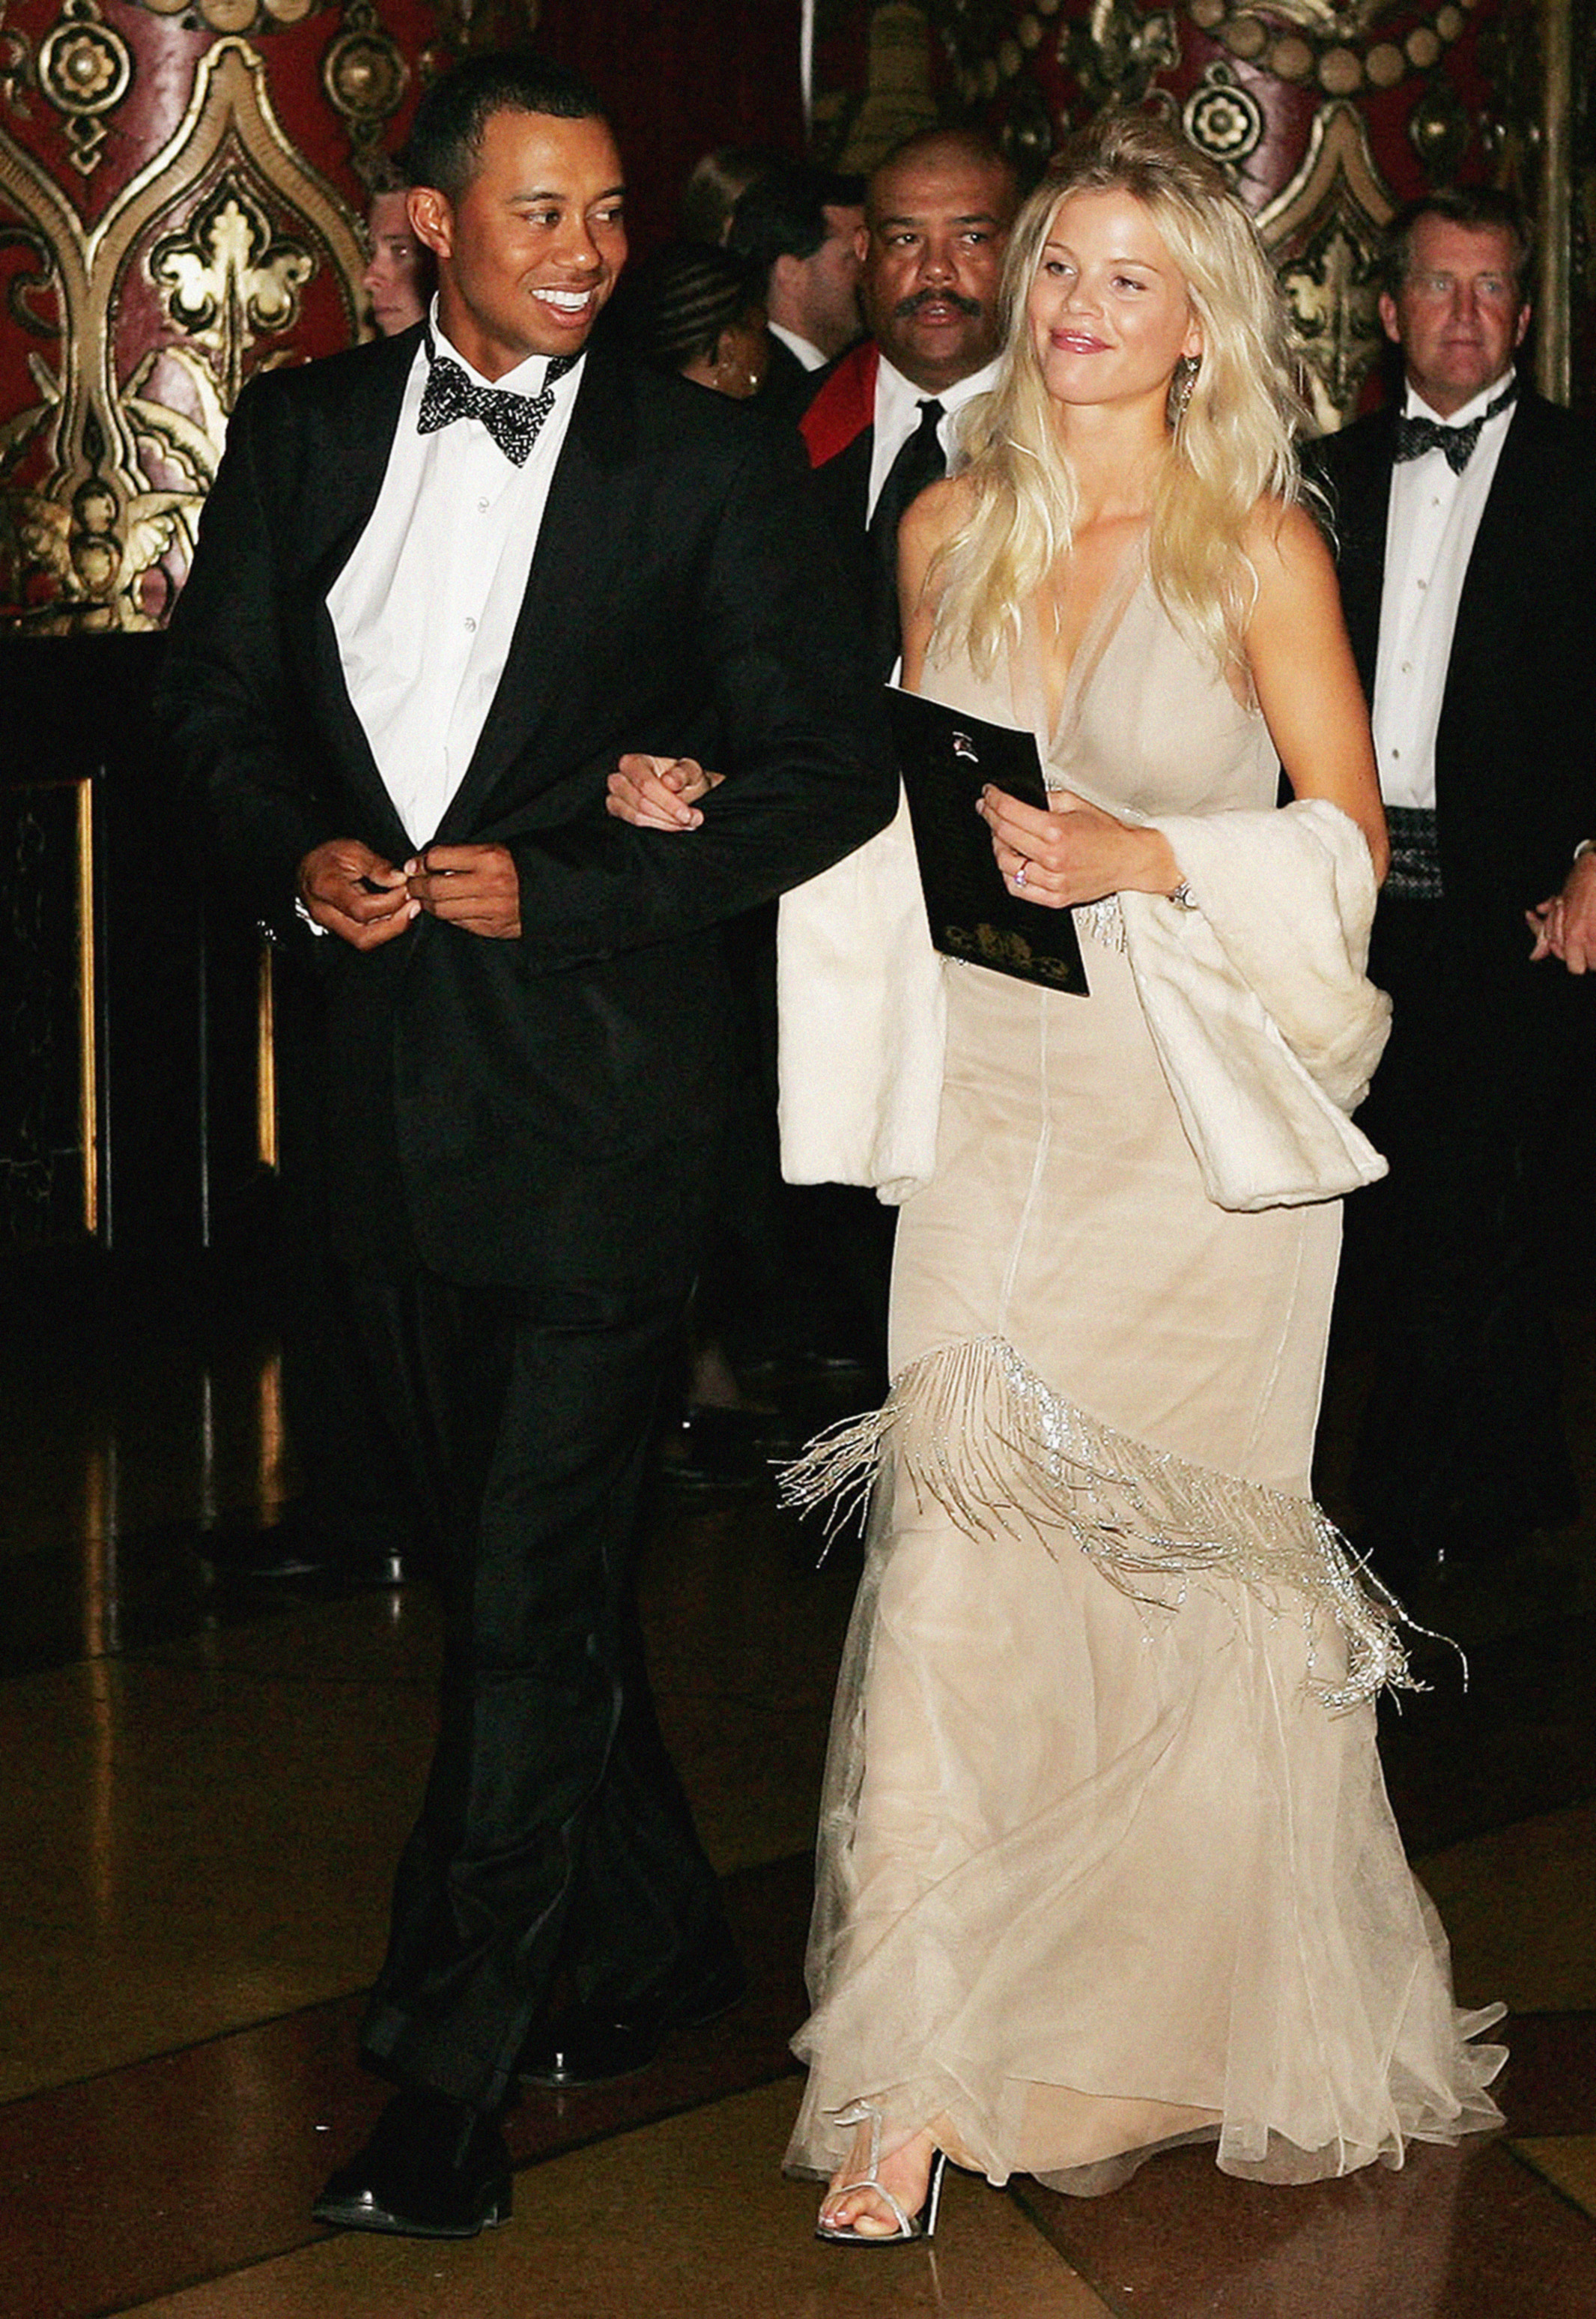 Tiger Woods and Elin Nordegren during the 35th Ryder Cup Matches Gala Dinner at the Fox Theater on September, 15 2004, in Detroit, Michigan. | Source: Getty Images